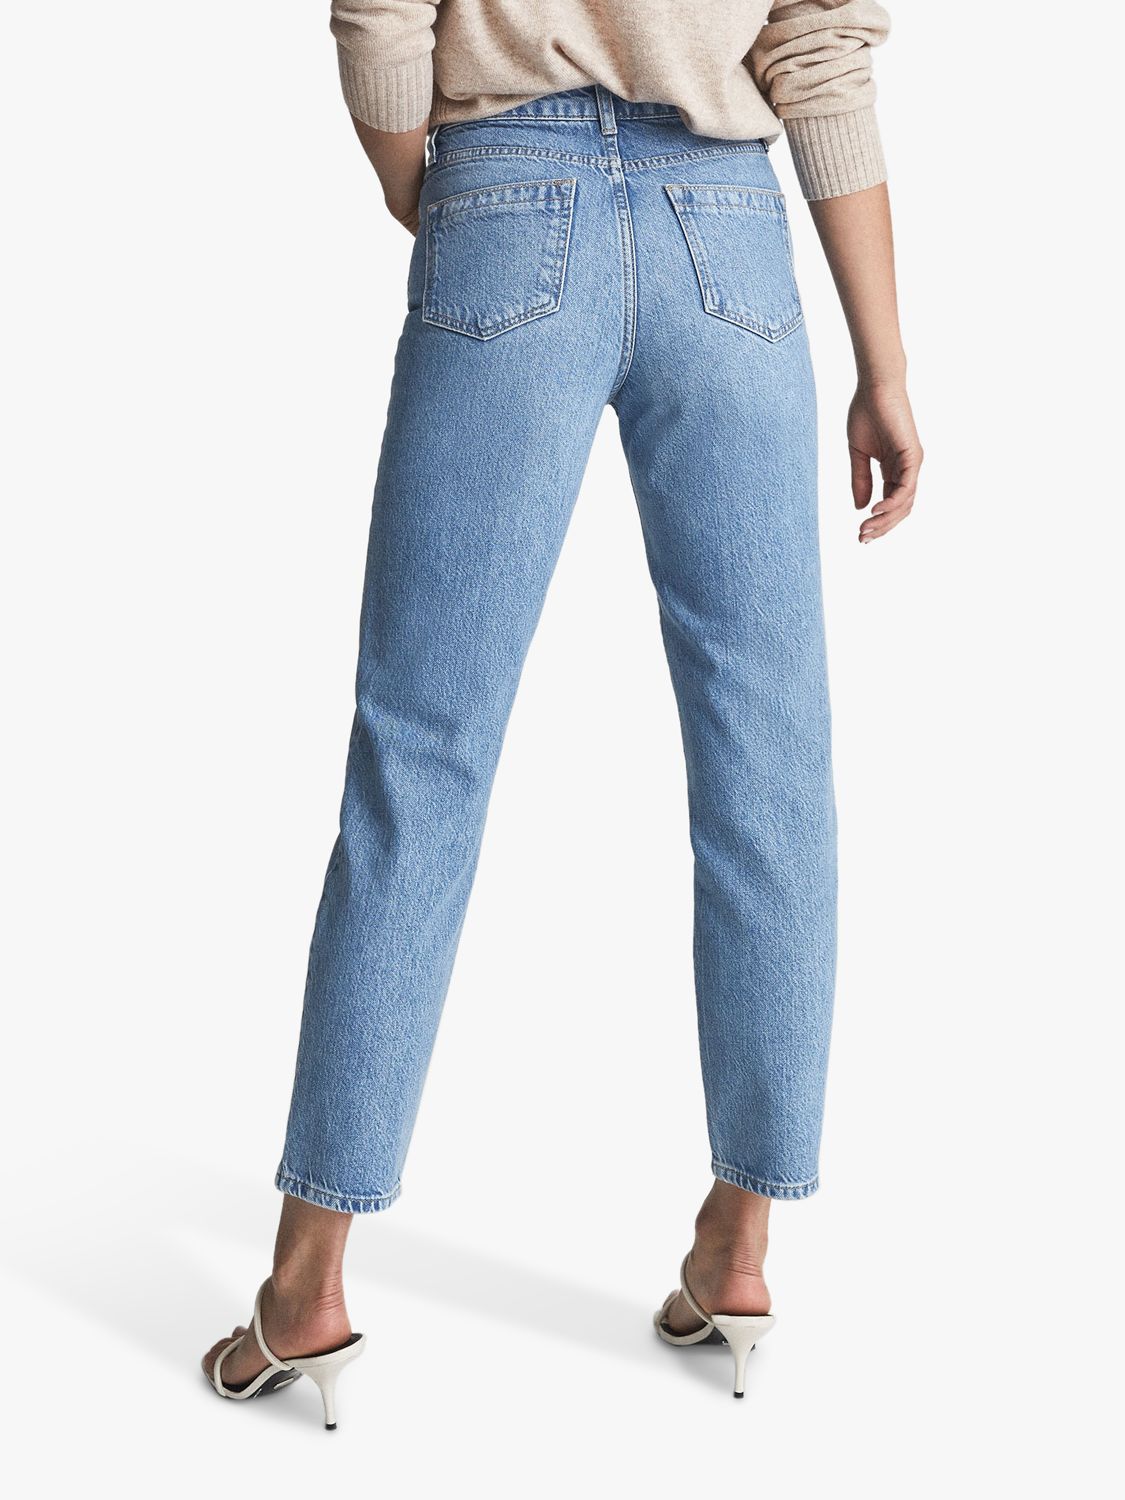 Reiss Raye Cropped Jeans, Pale Blue at John Lewis & Partners